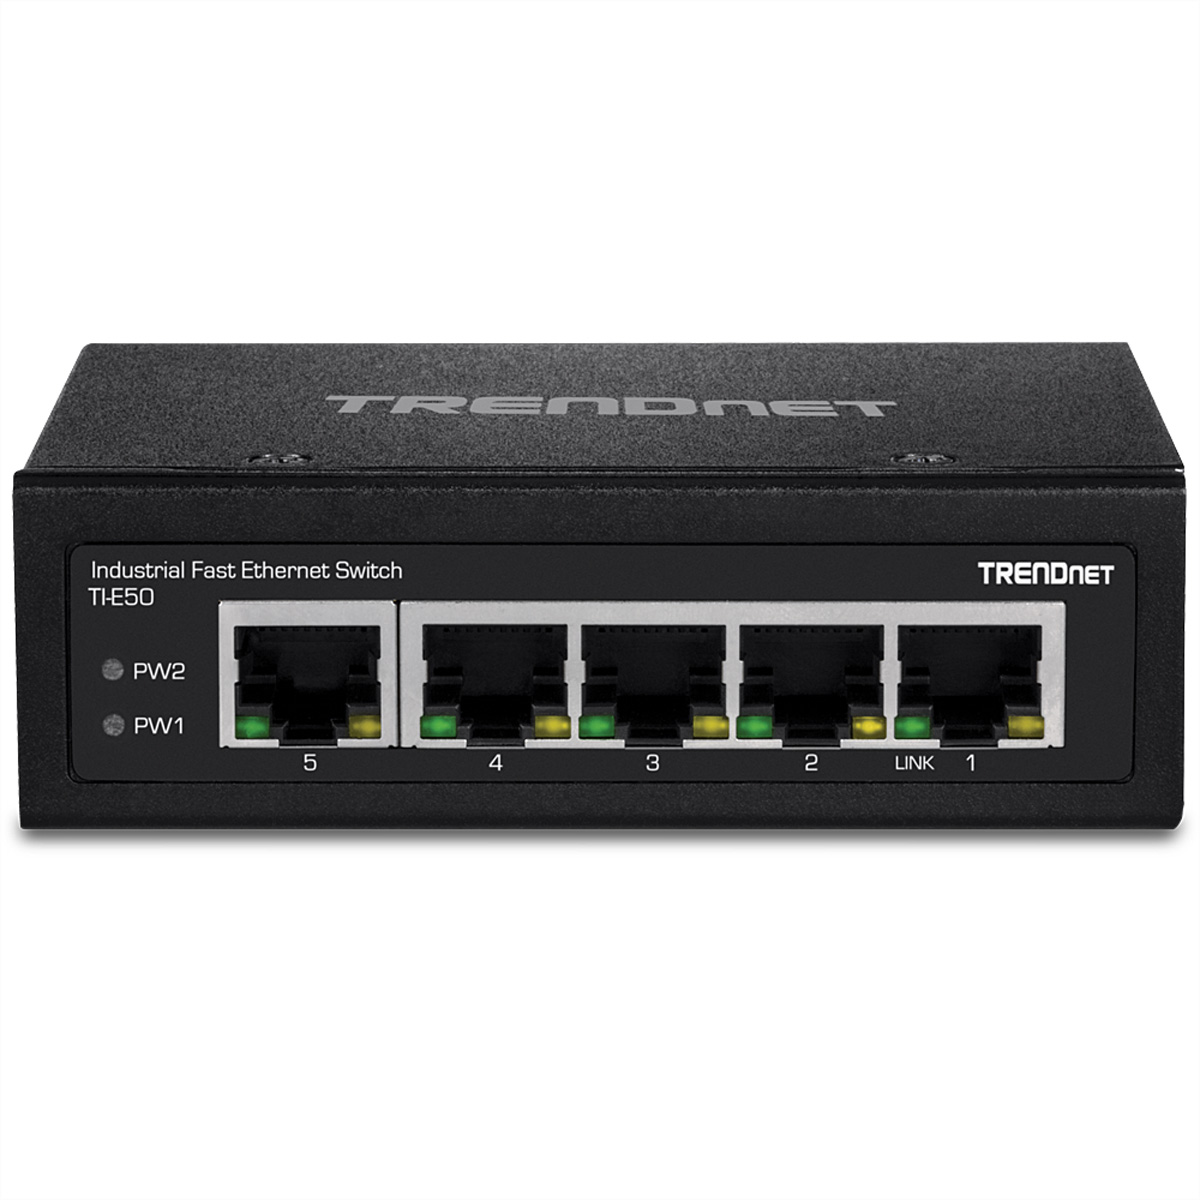 TRENDNET TI-E50 Industrial Ethernet Industrial DIN-Rail 5-Port Fast Switch Networking